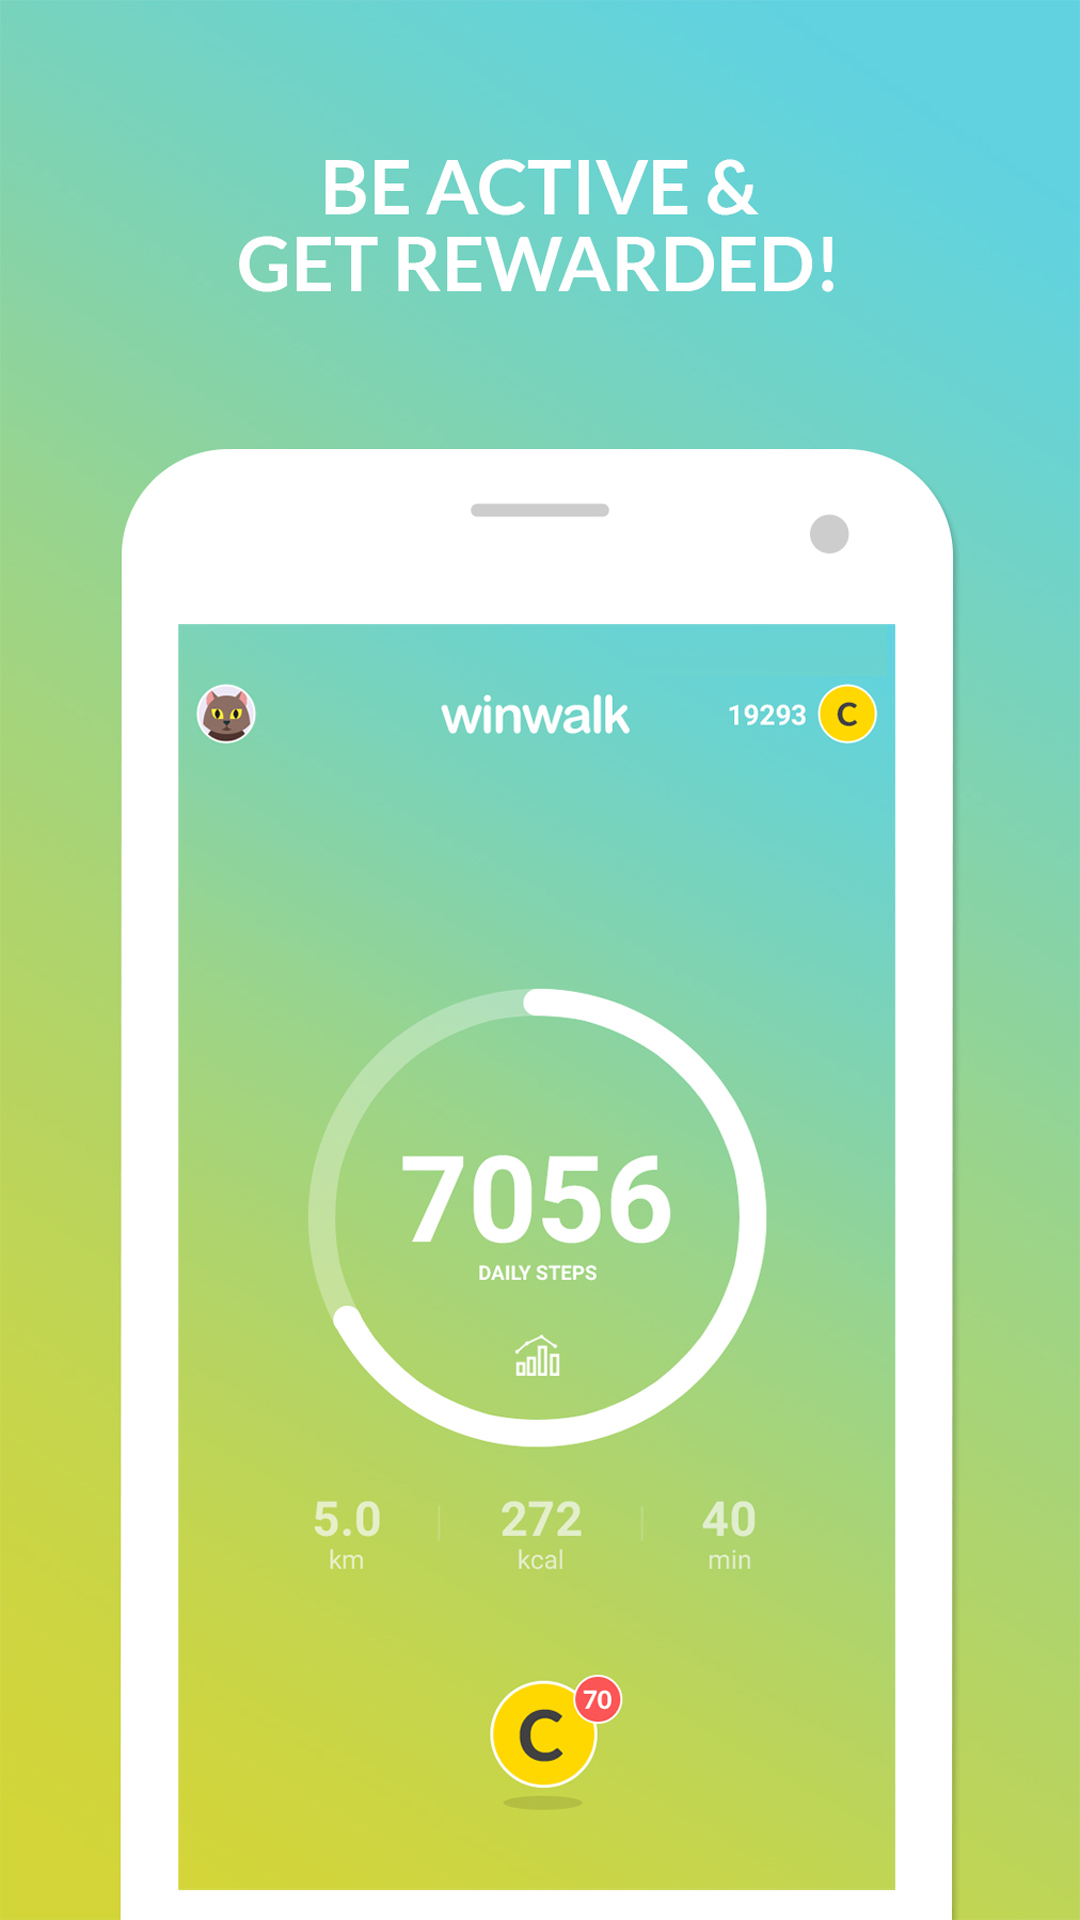 Winwalk - Rewards For Walking Apk 2.5.2 For Android – Download Winwalk -  Rewards For Walking Apk Latest Version From Apkfab.Com